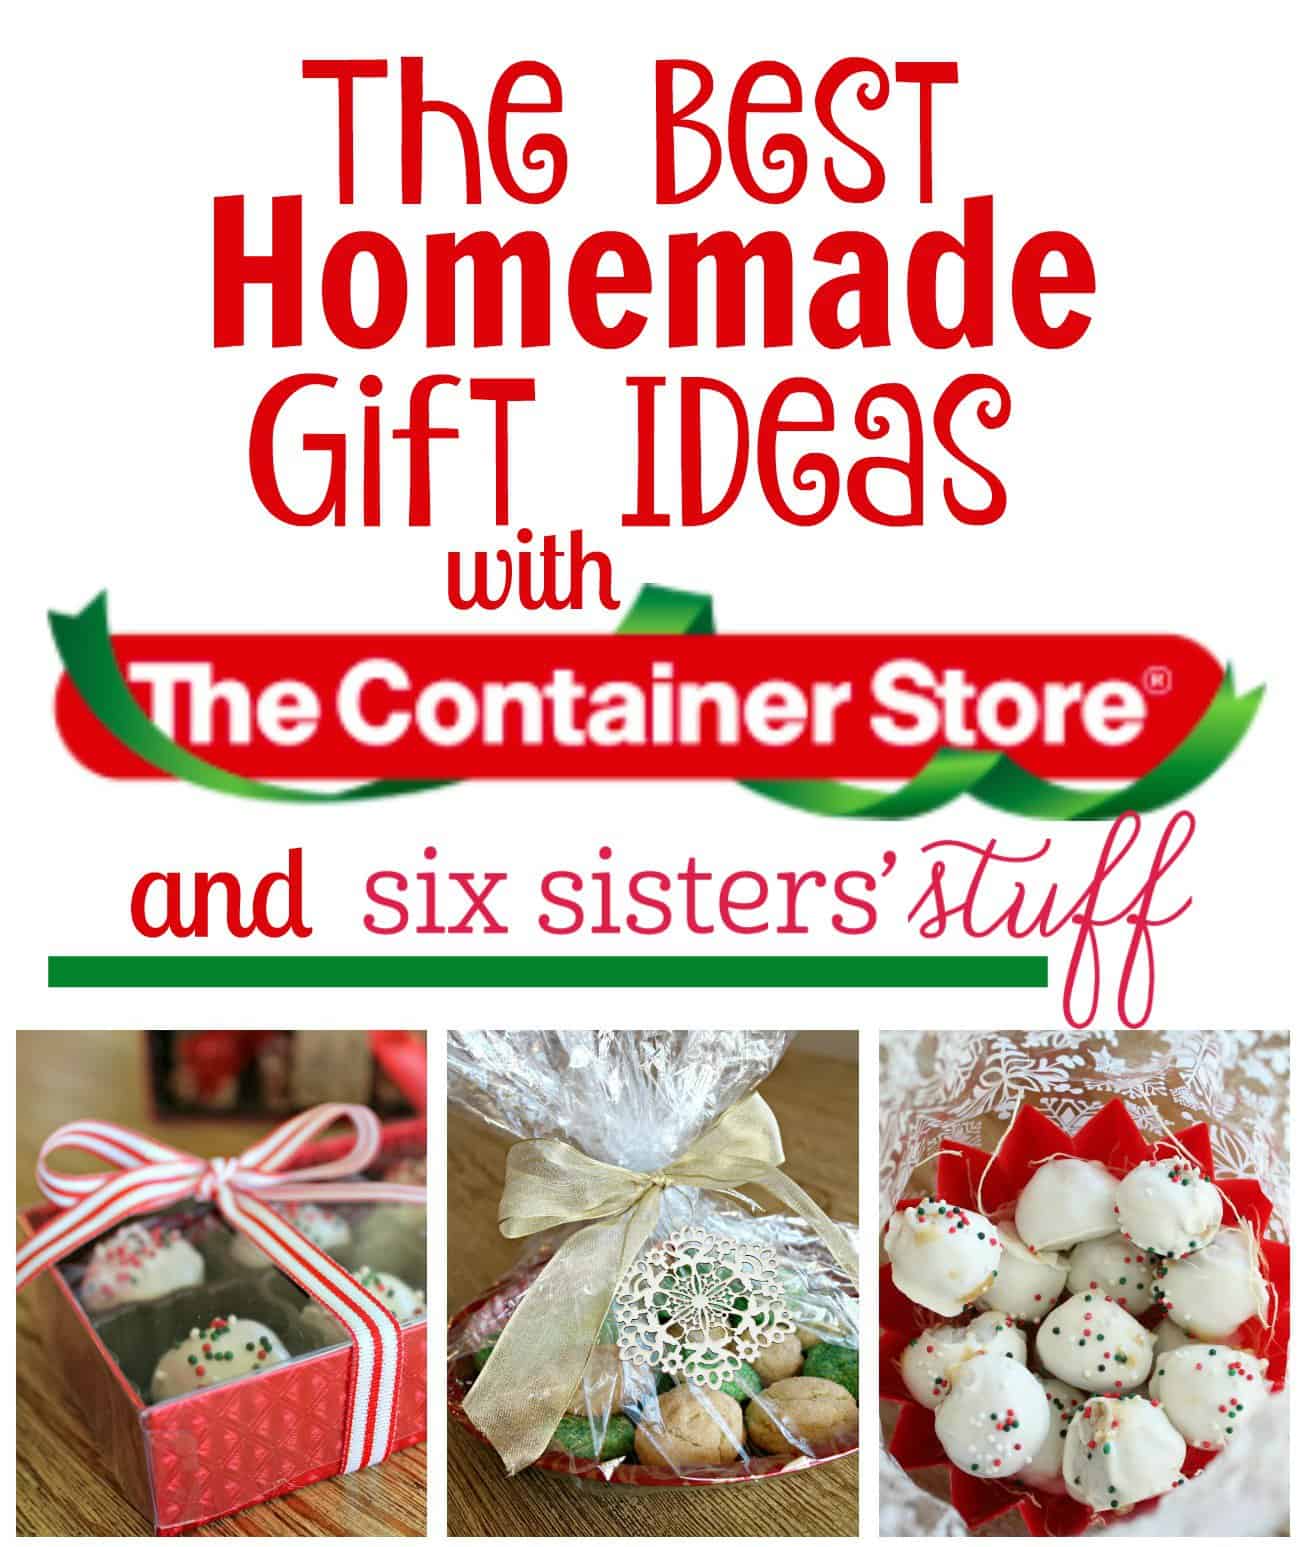 Best Homemade Neighbor Gift Ideas: 6 Sisters Share Their Favorite Recipes  and Gift Packaging Ideas